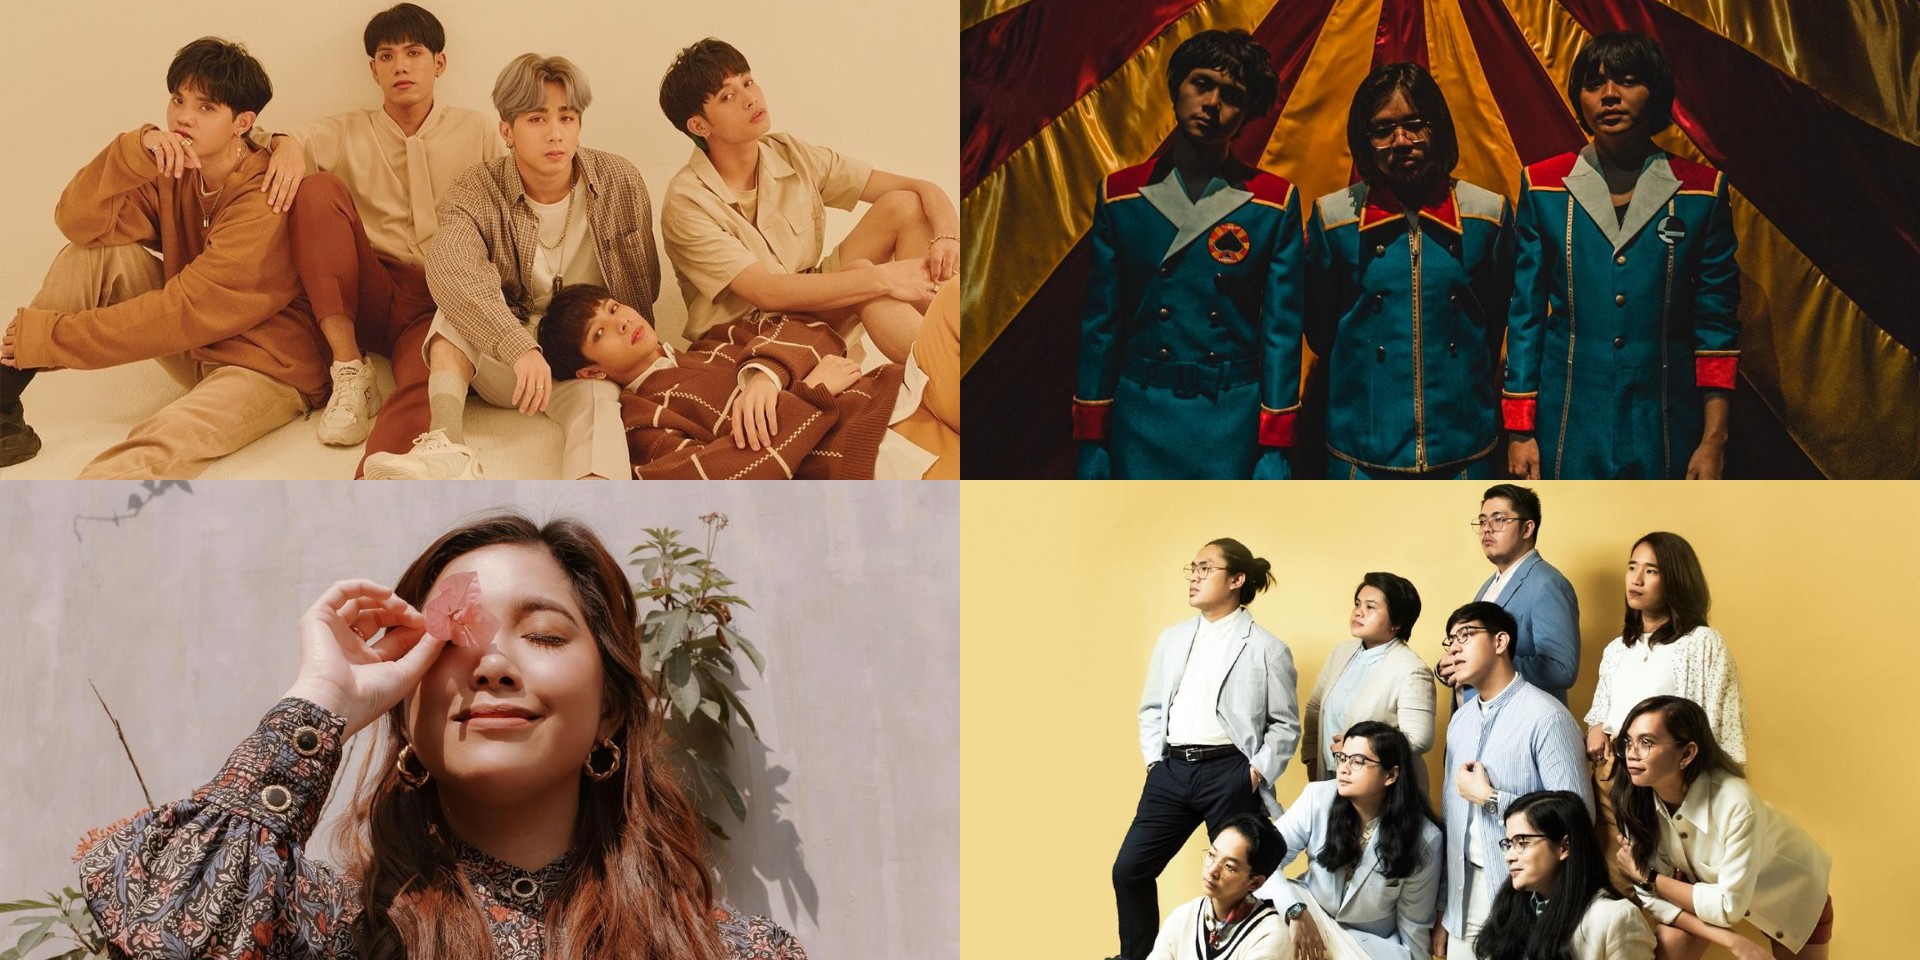 IV of Spades, SB19, Ben&Ben, Moira Dela Torre, and more win at the 33rd Awit Awards